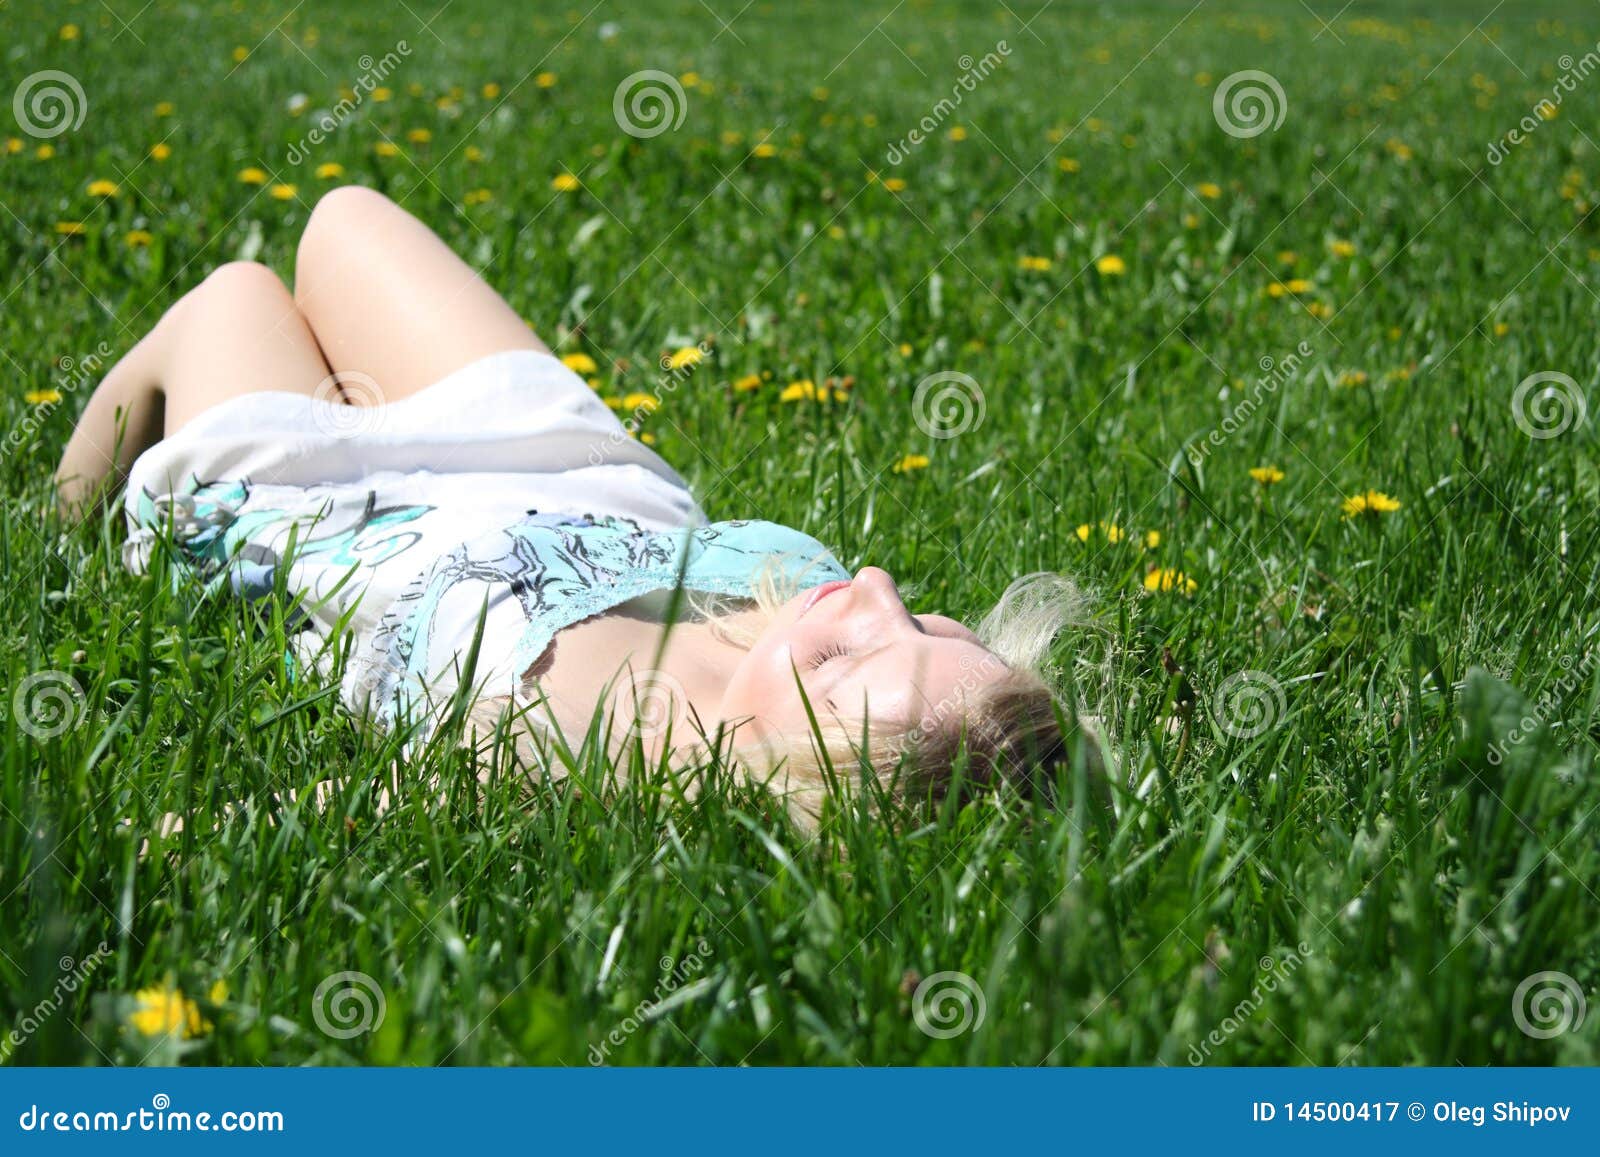 Summer relaxation stock image. Image of spring, space - 14500417